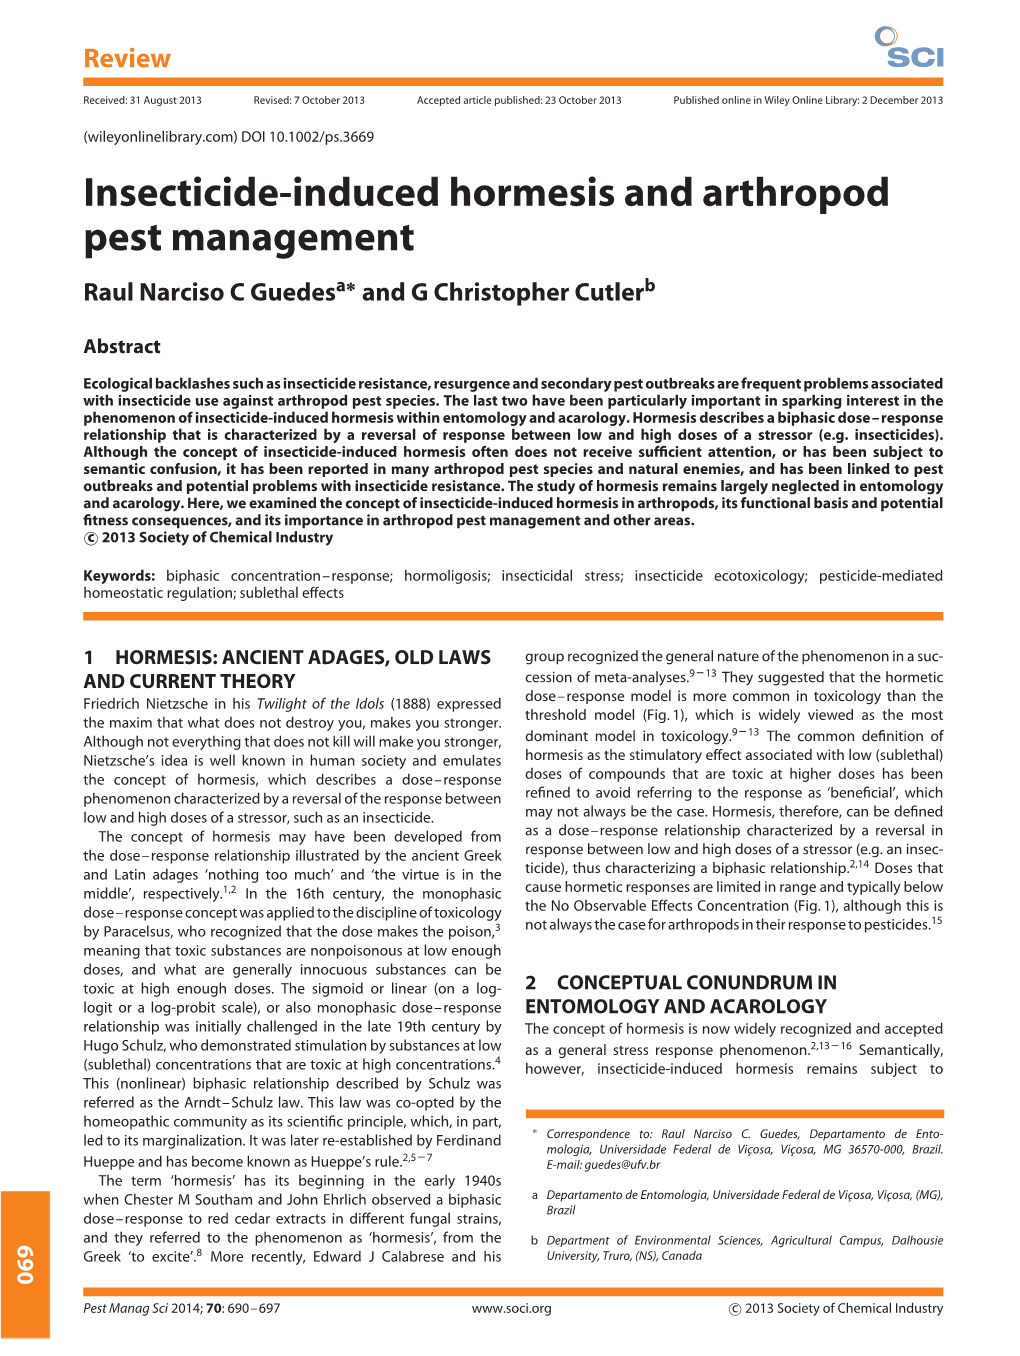 Insecticideinduced Hormesis and Arthropod Pest Management